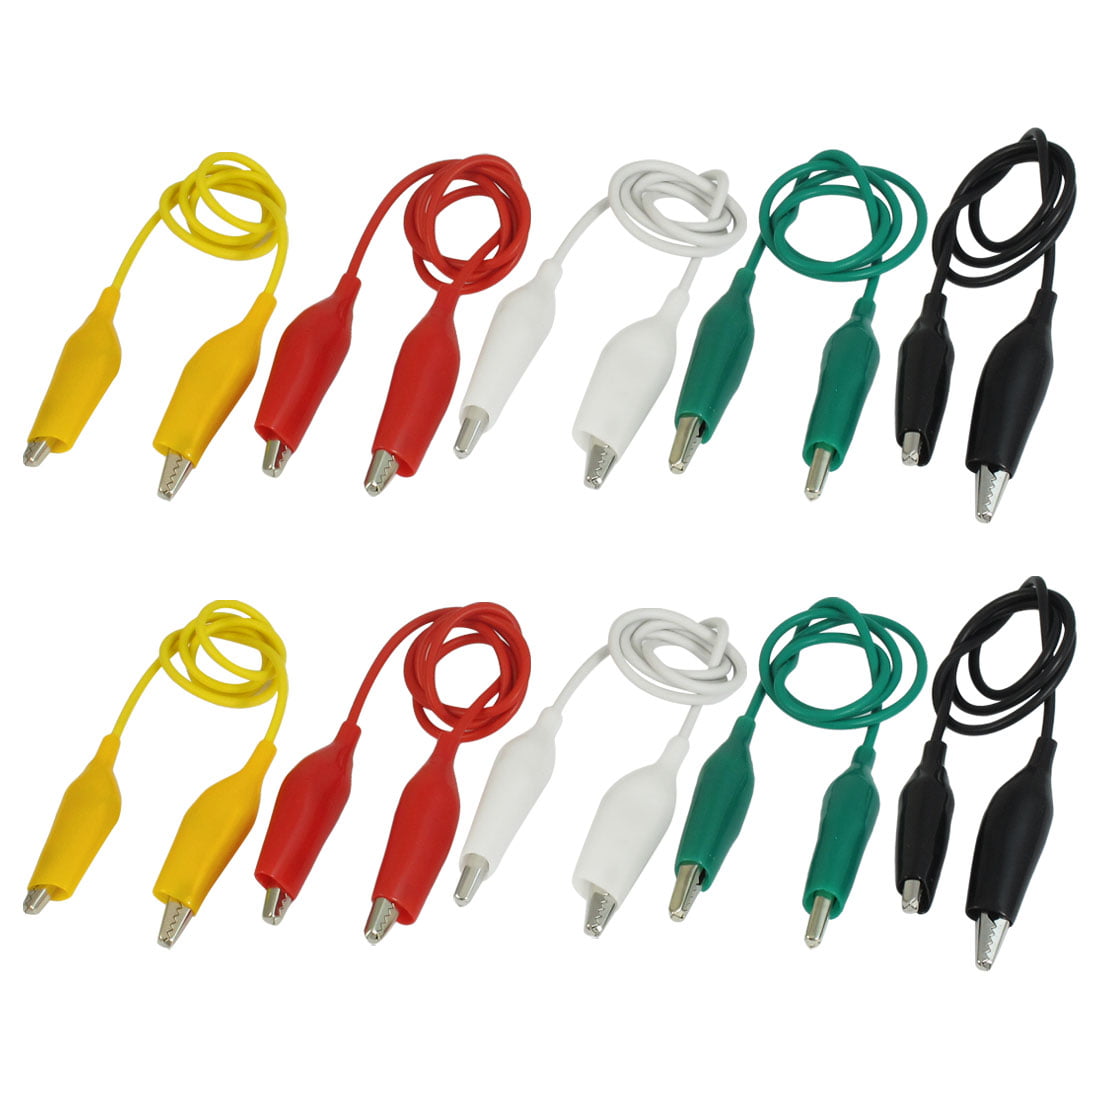 5x Crocodile Clips Cable Double-ended Alligator Jumper Test Leads Wire Cable 